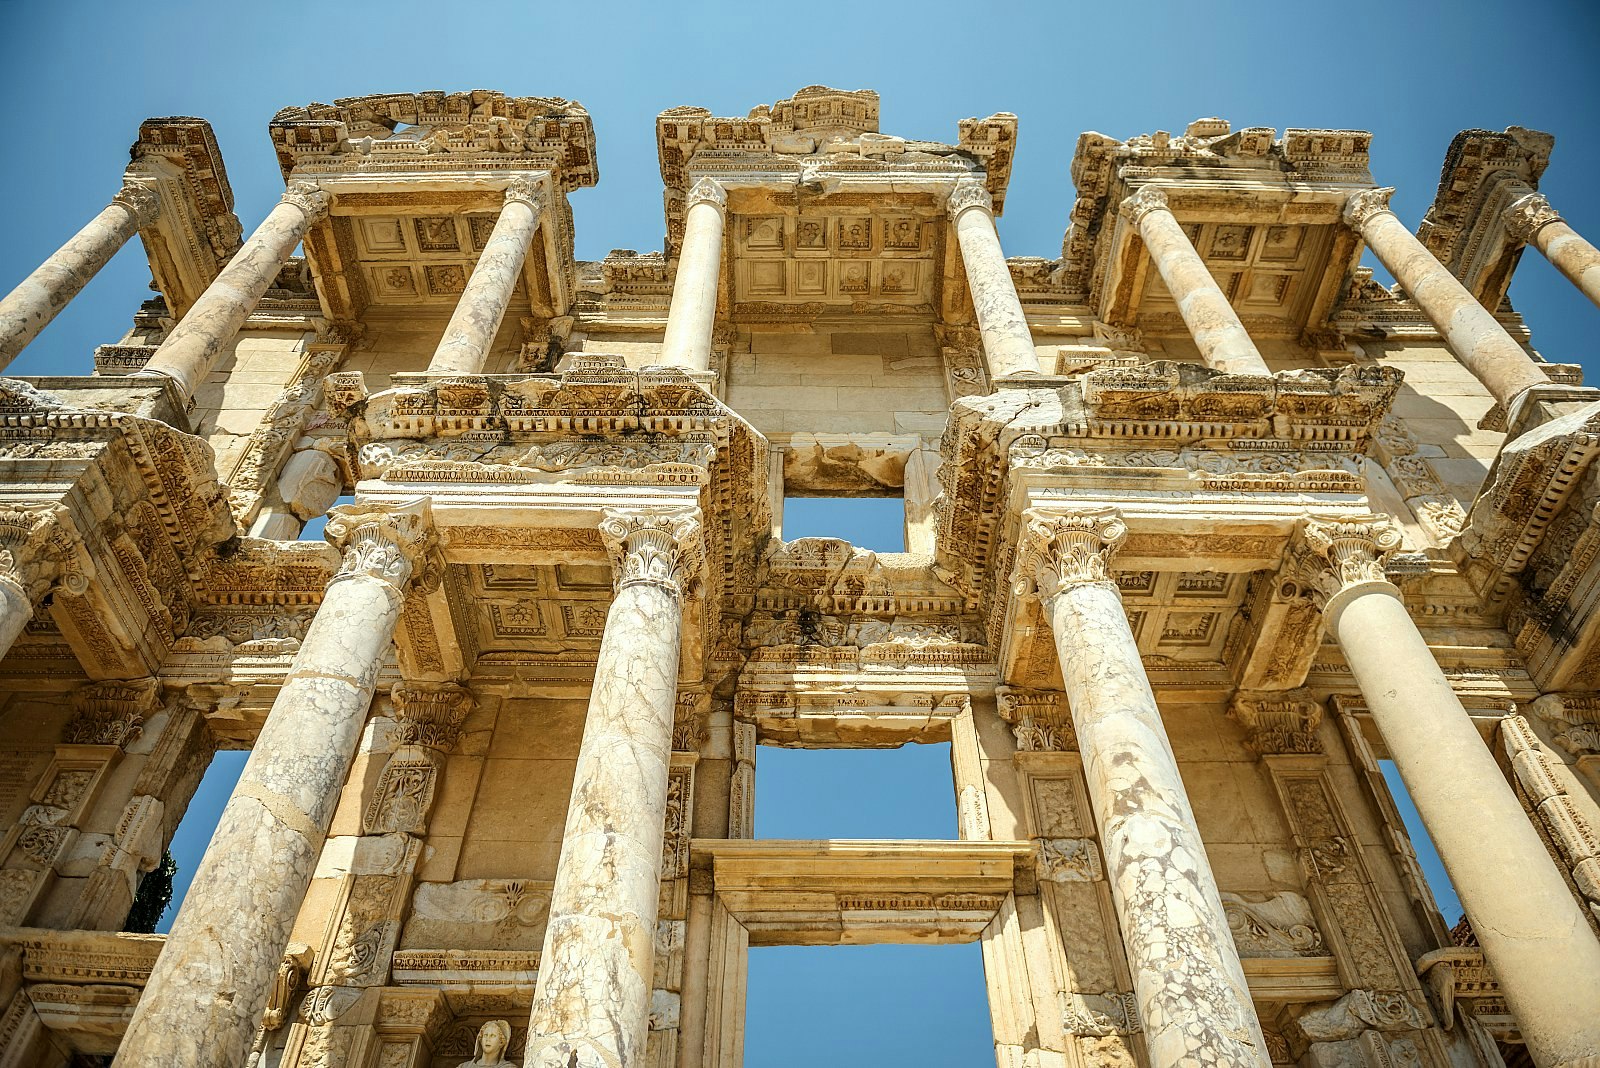 Pillared façade of the Library of Celsus at Ephesus, Turkey